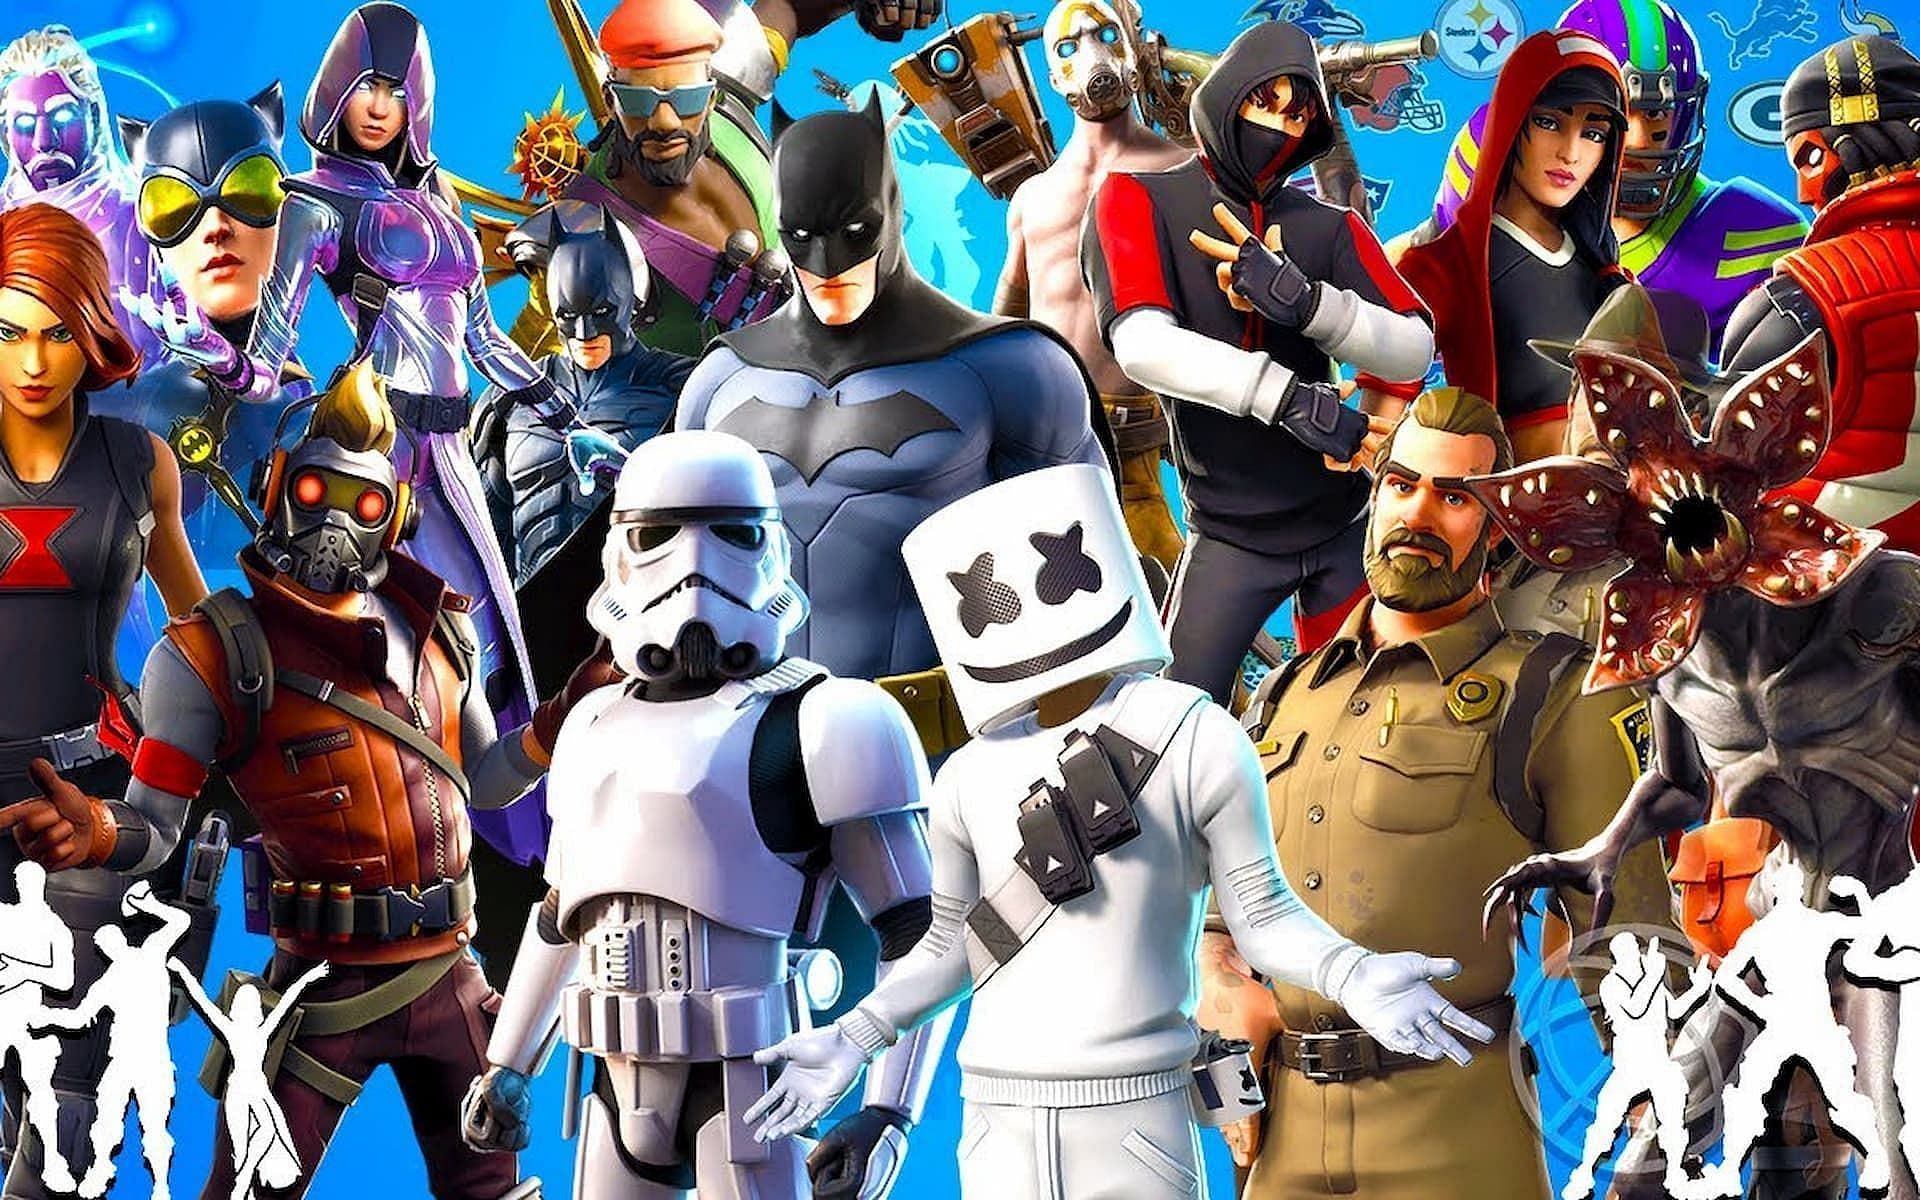 Is Fortnite concentrating too much on collaborations? (Image via Epic Games)